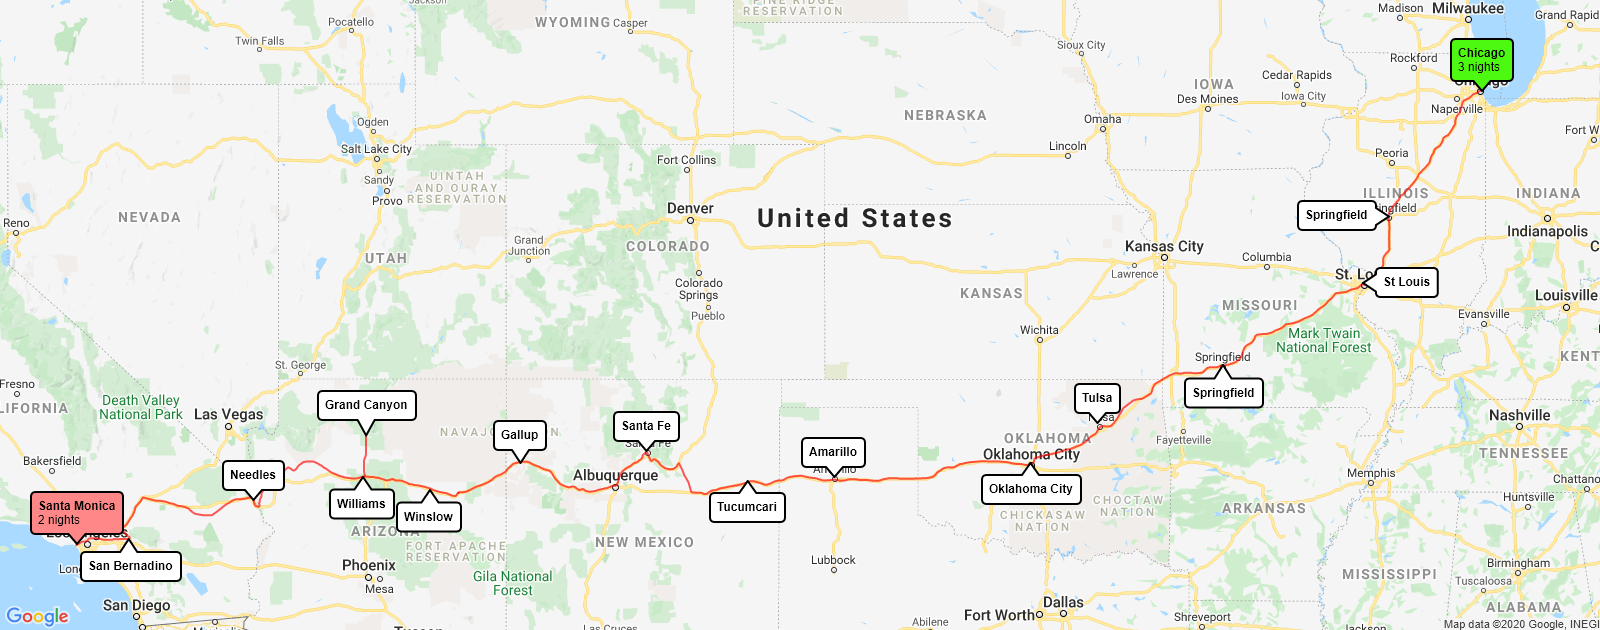 Best Times for a Route 66 Road Trip